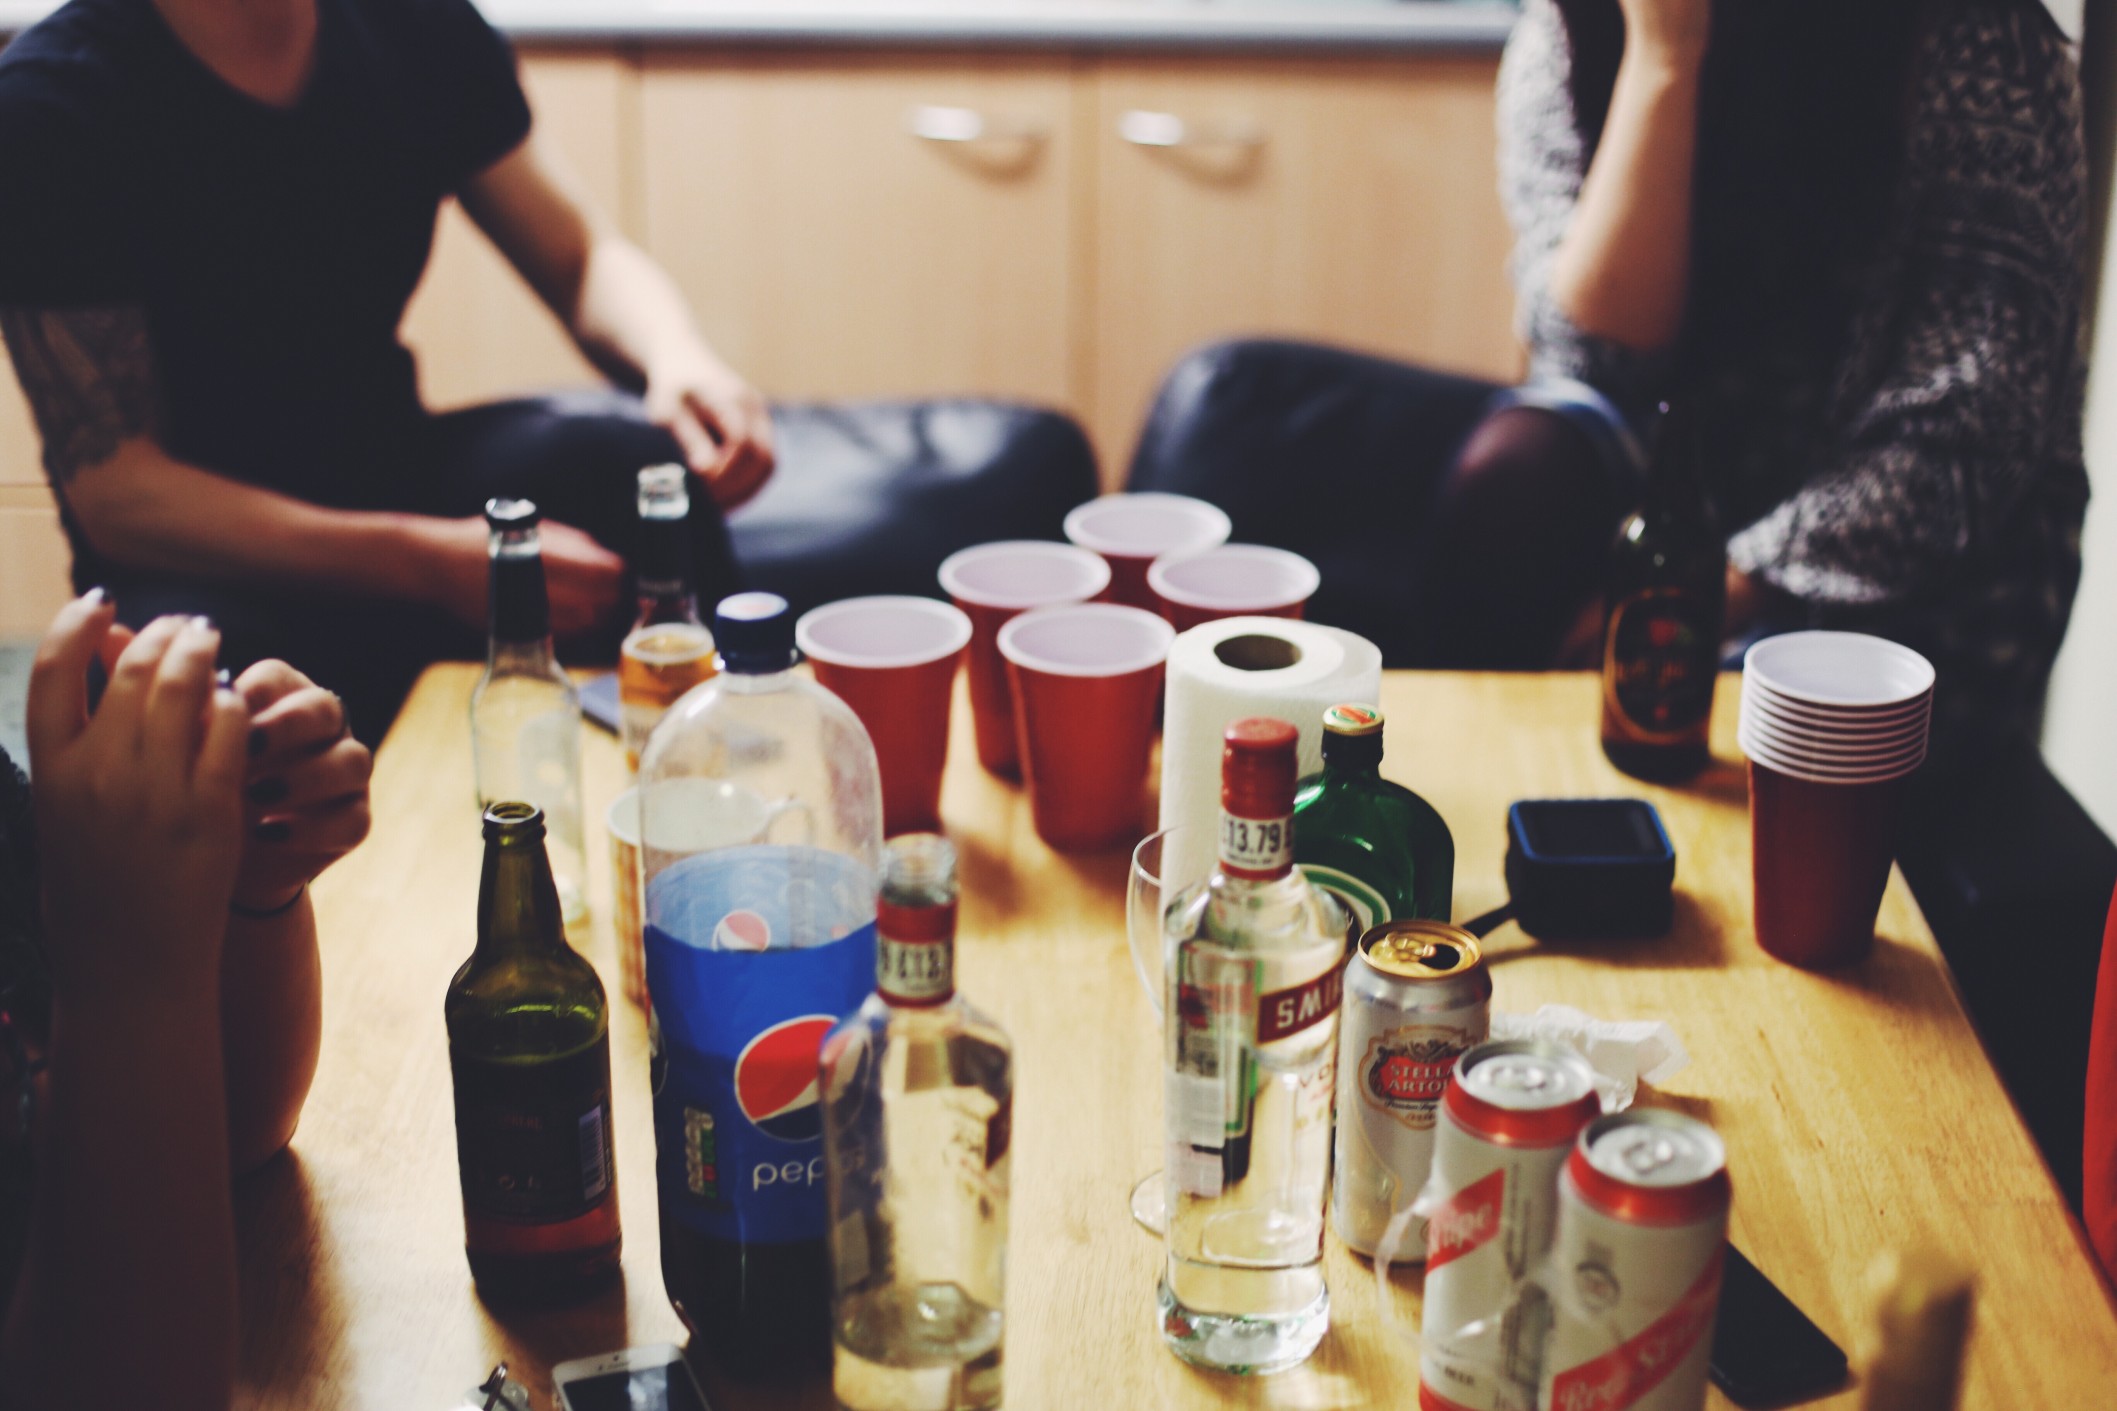 5 Drinking Games You Can Play Anywhere And How To Play Them,How Much Do You Tip Movers Reddit